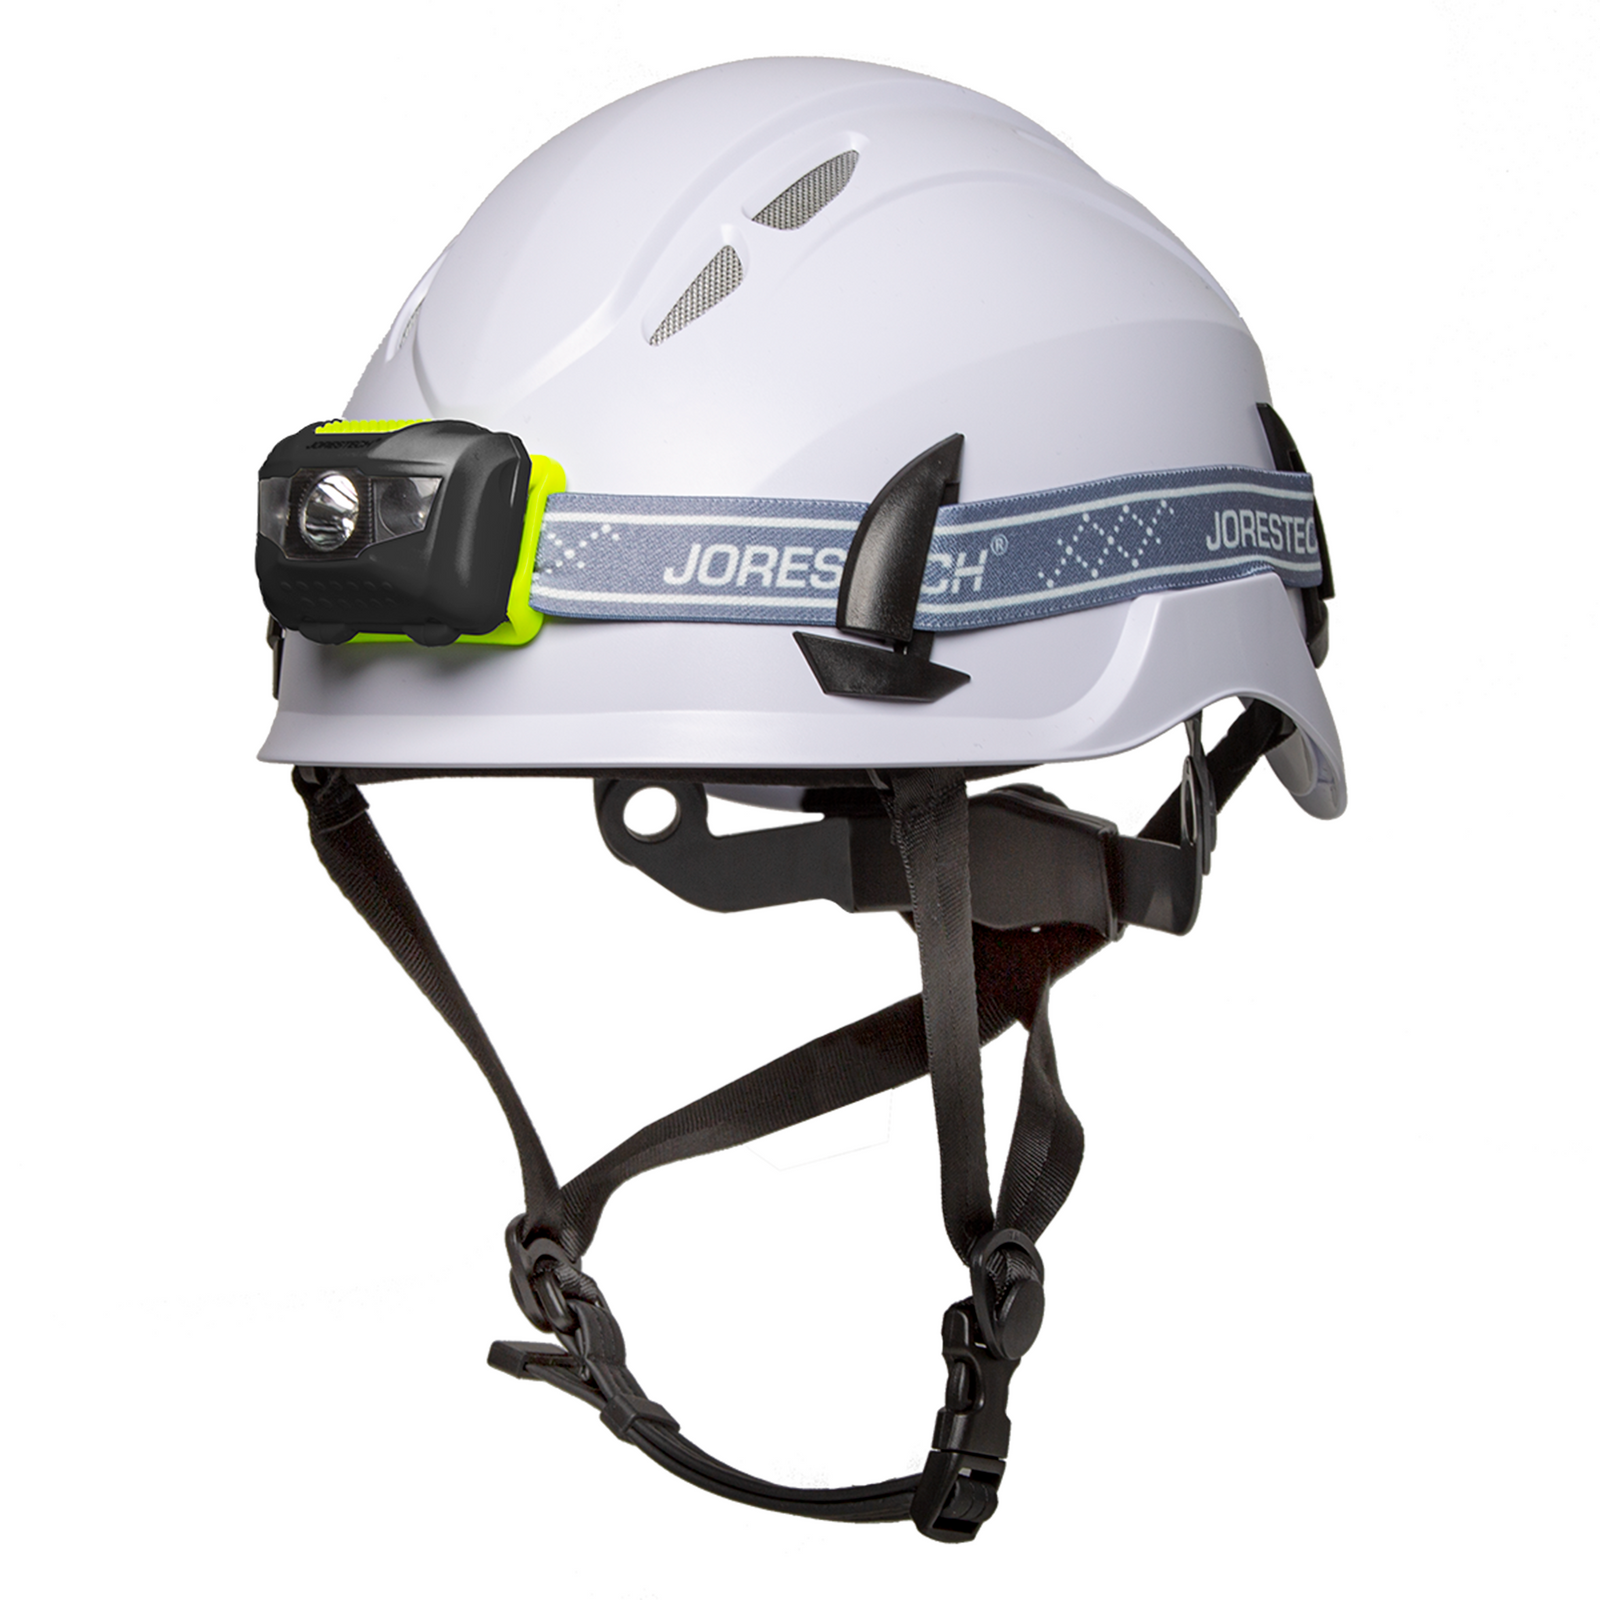 Diagonal view of a white ventilated JORESTECH hard hat with chin strap and a black water resistant headlamp bundle